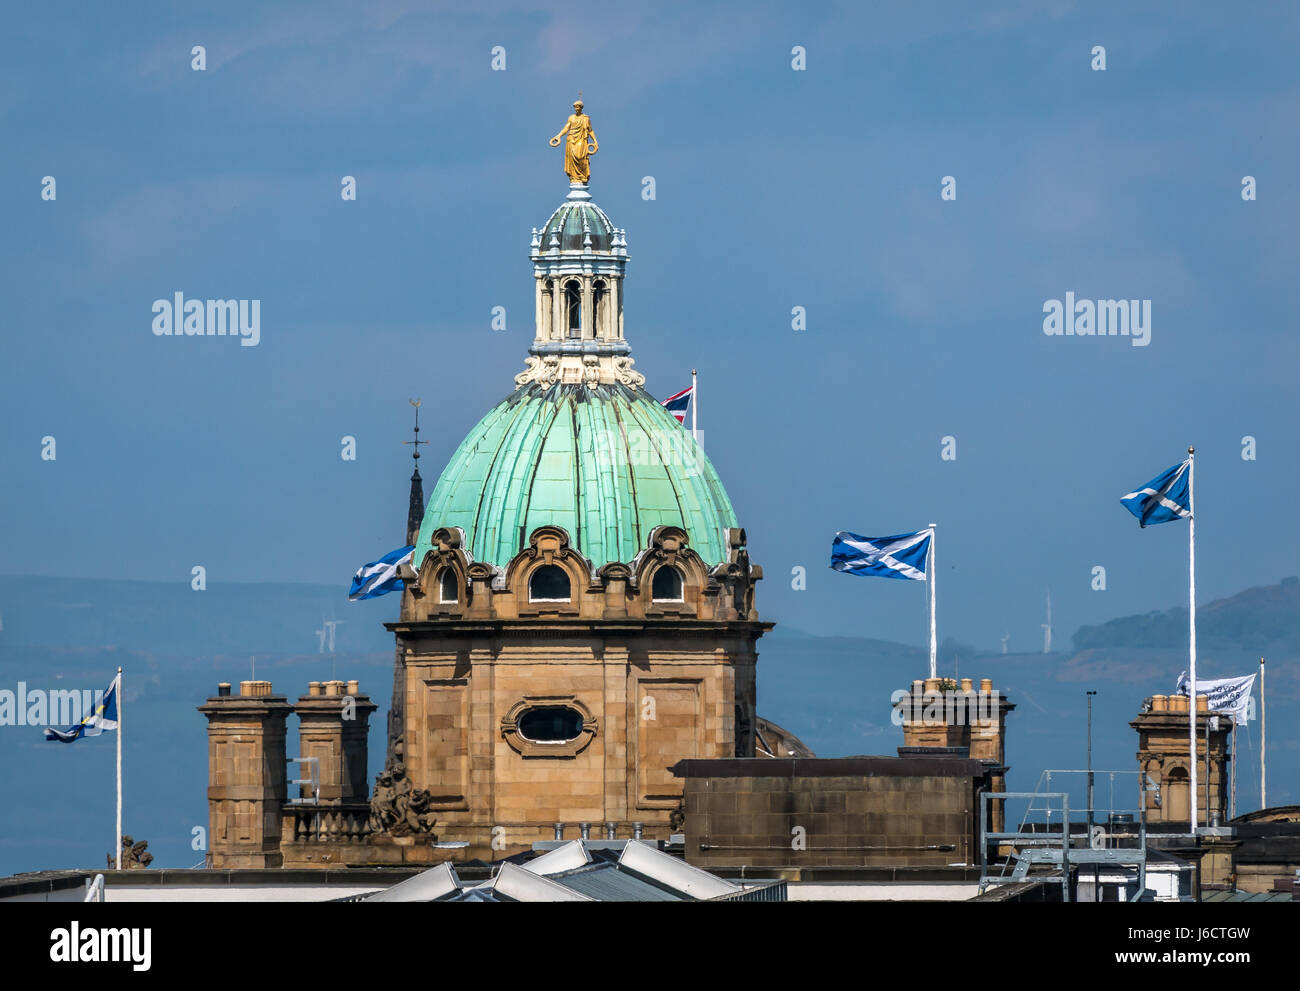 View of copper dome and spire on top of Bank of Scotland headquarters, The Mound, Edinburgh, Scotland Uk, with waving saltire St Andrews Cross flags Stock Photo